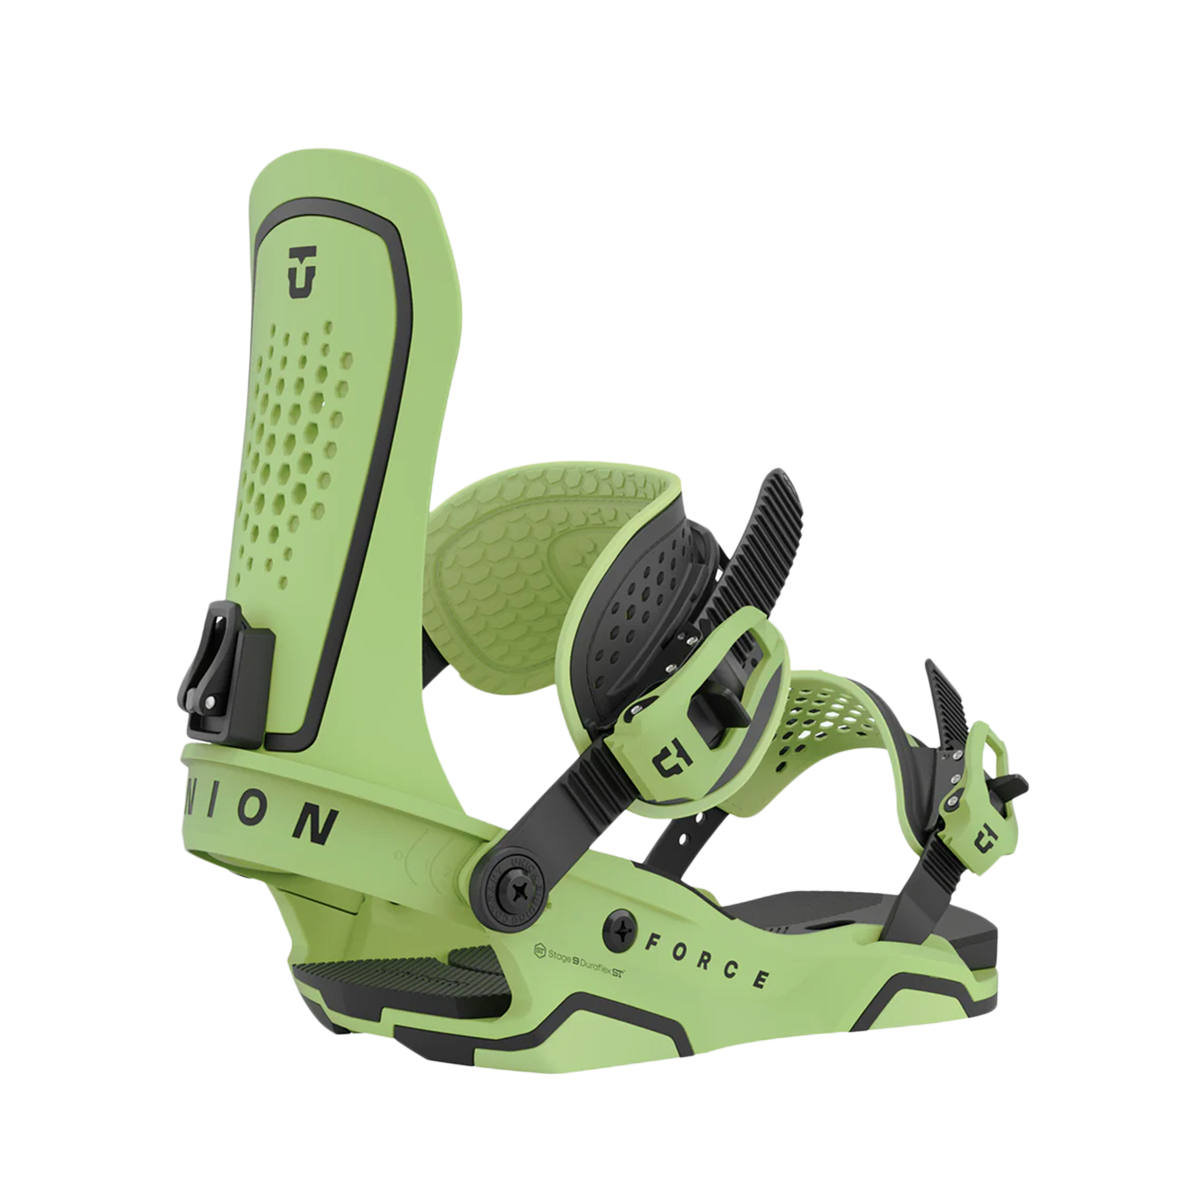 QuickSett V2 : The first rotating disc for snowboard binding by